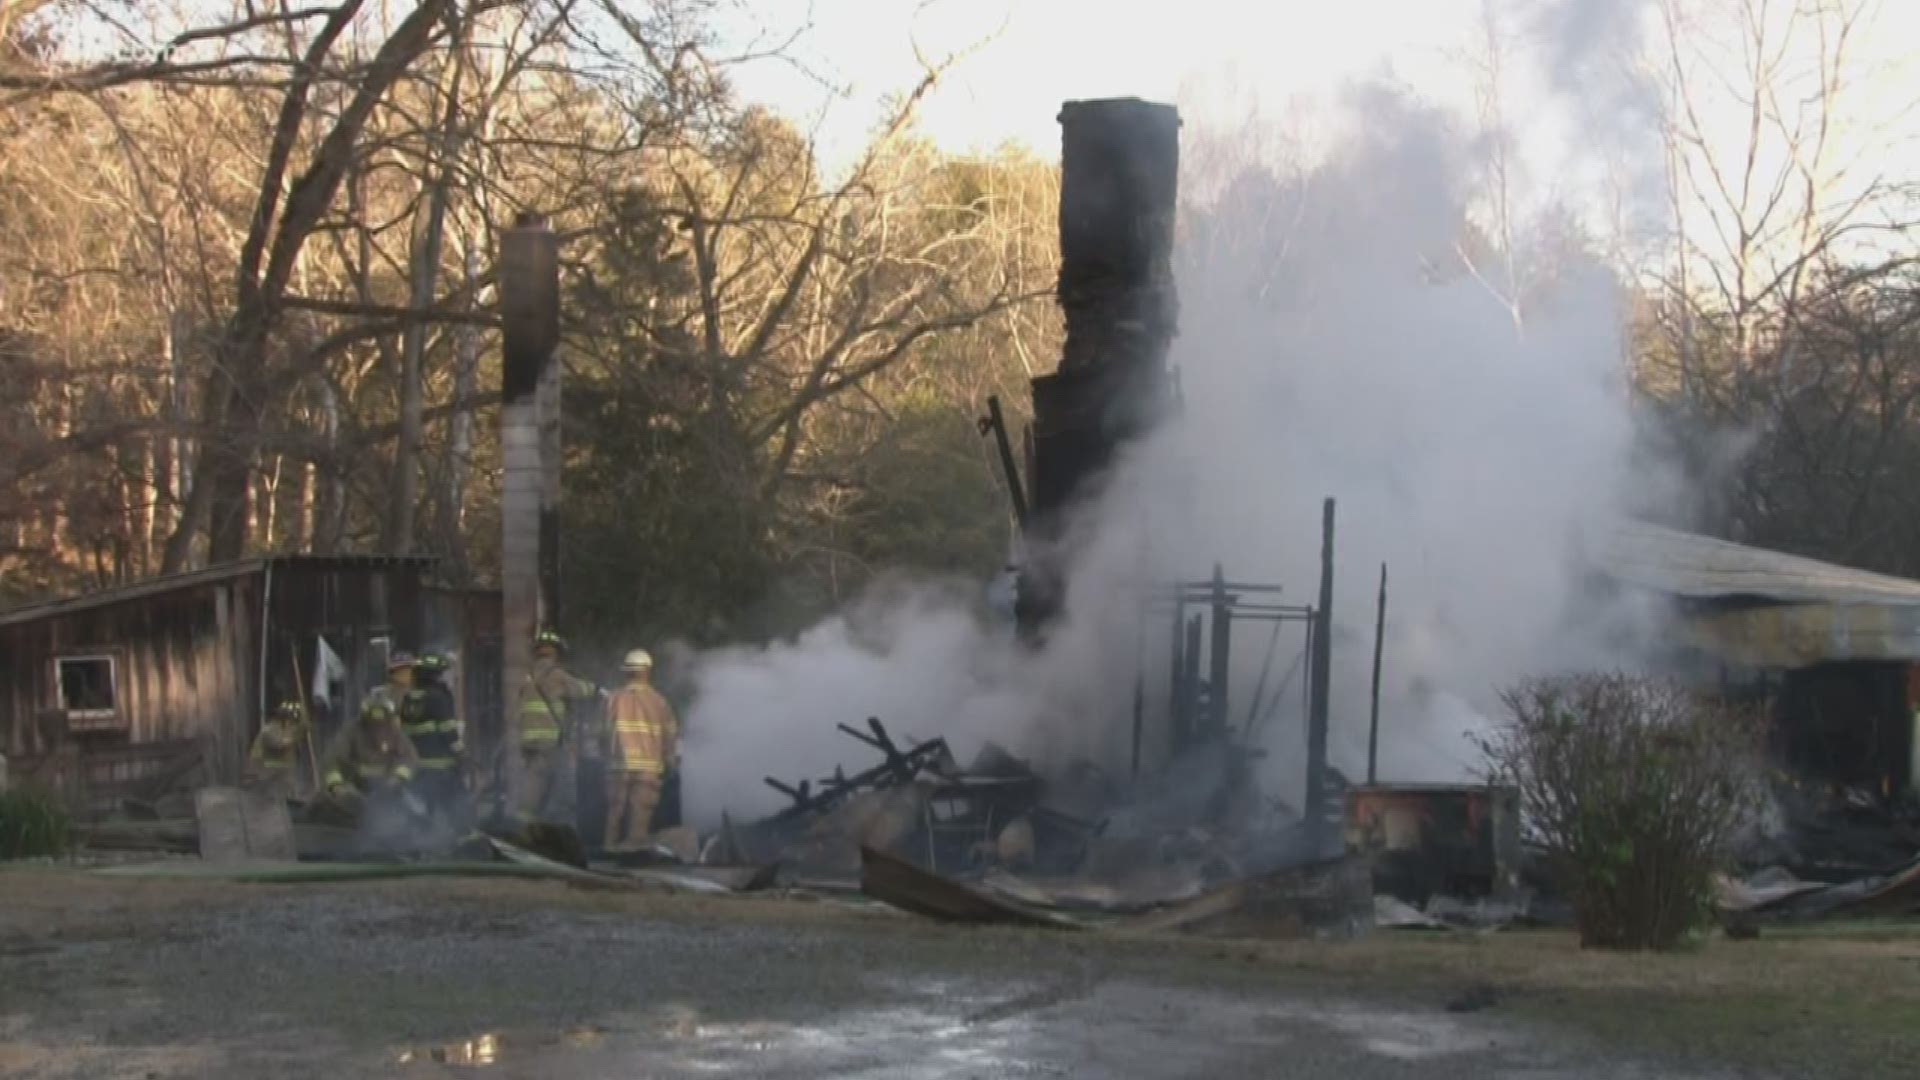 After a home explosion in Union County, a fire chief is warning homeowners to check their propane heaters.